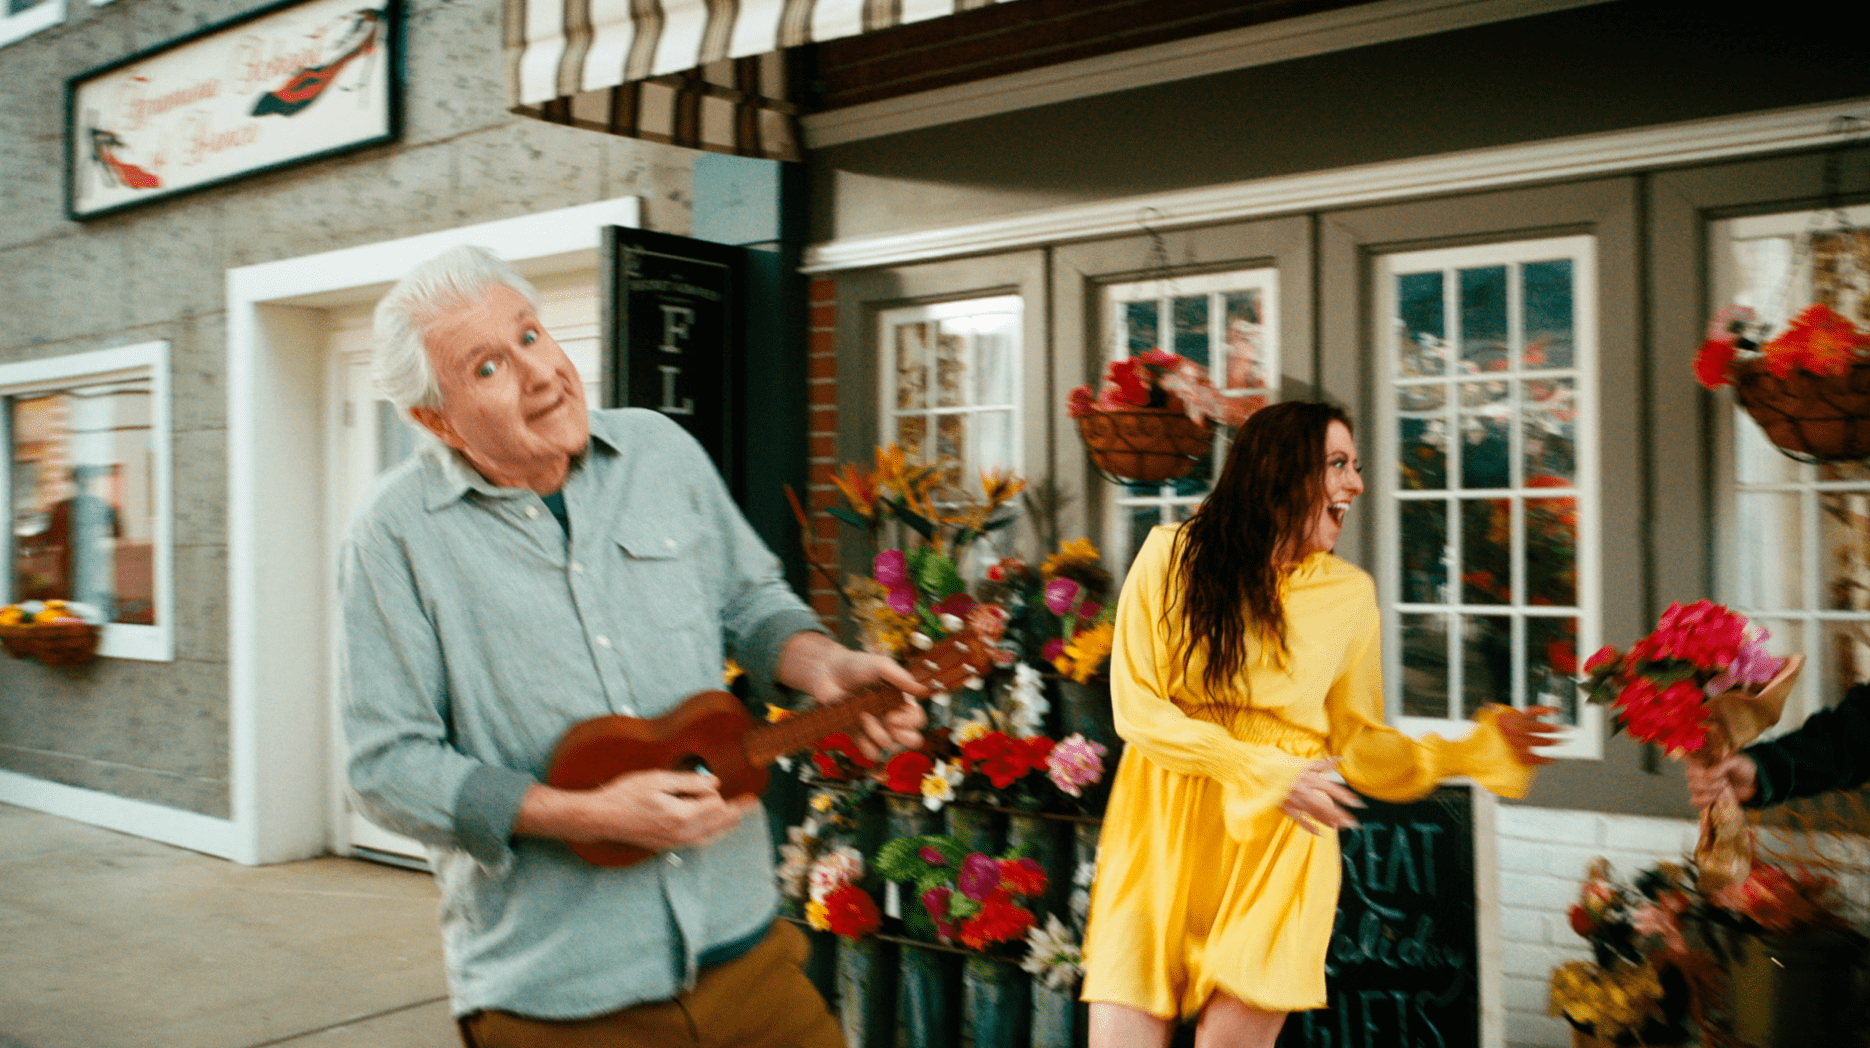 Commercial with an elderly man and a lady at a flowershop